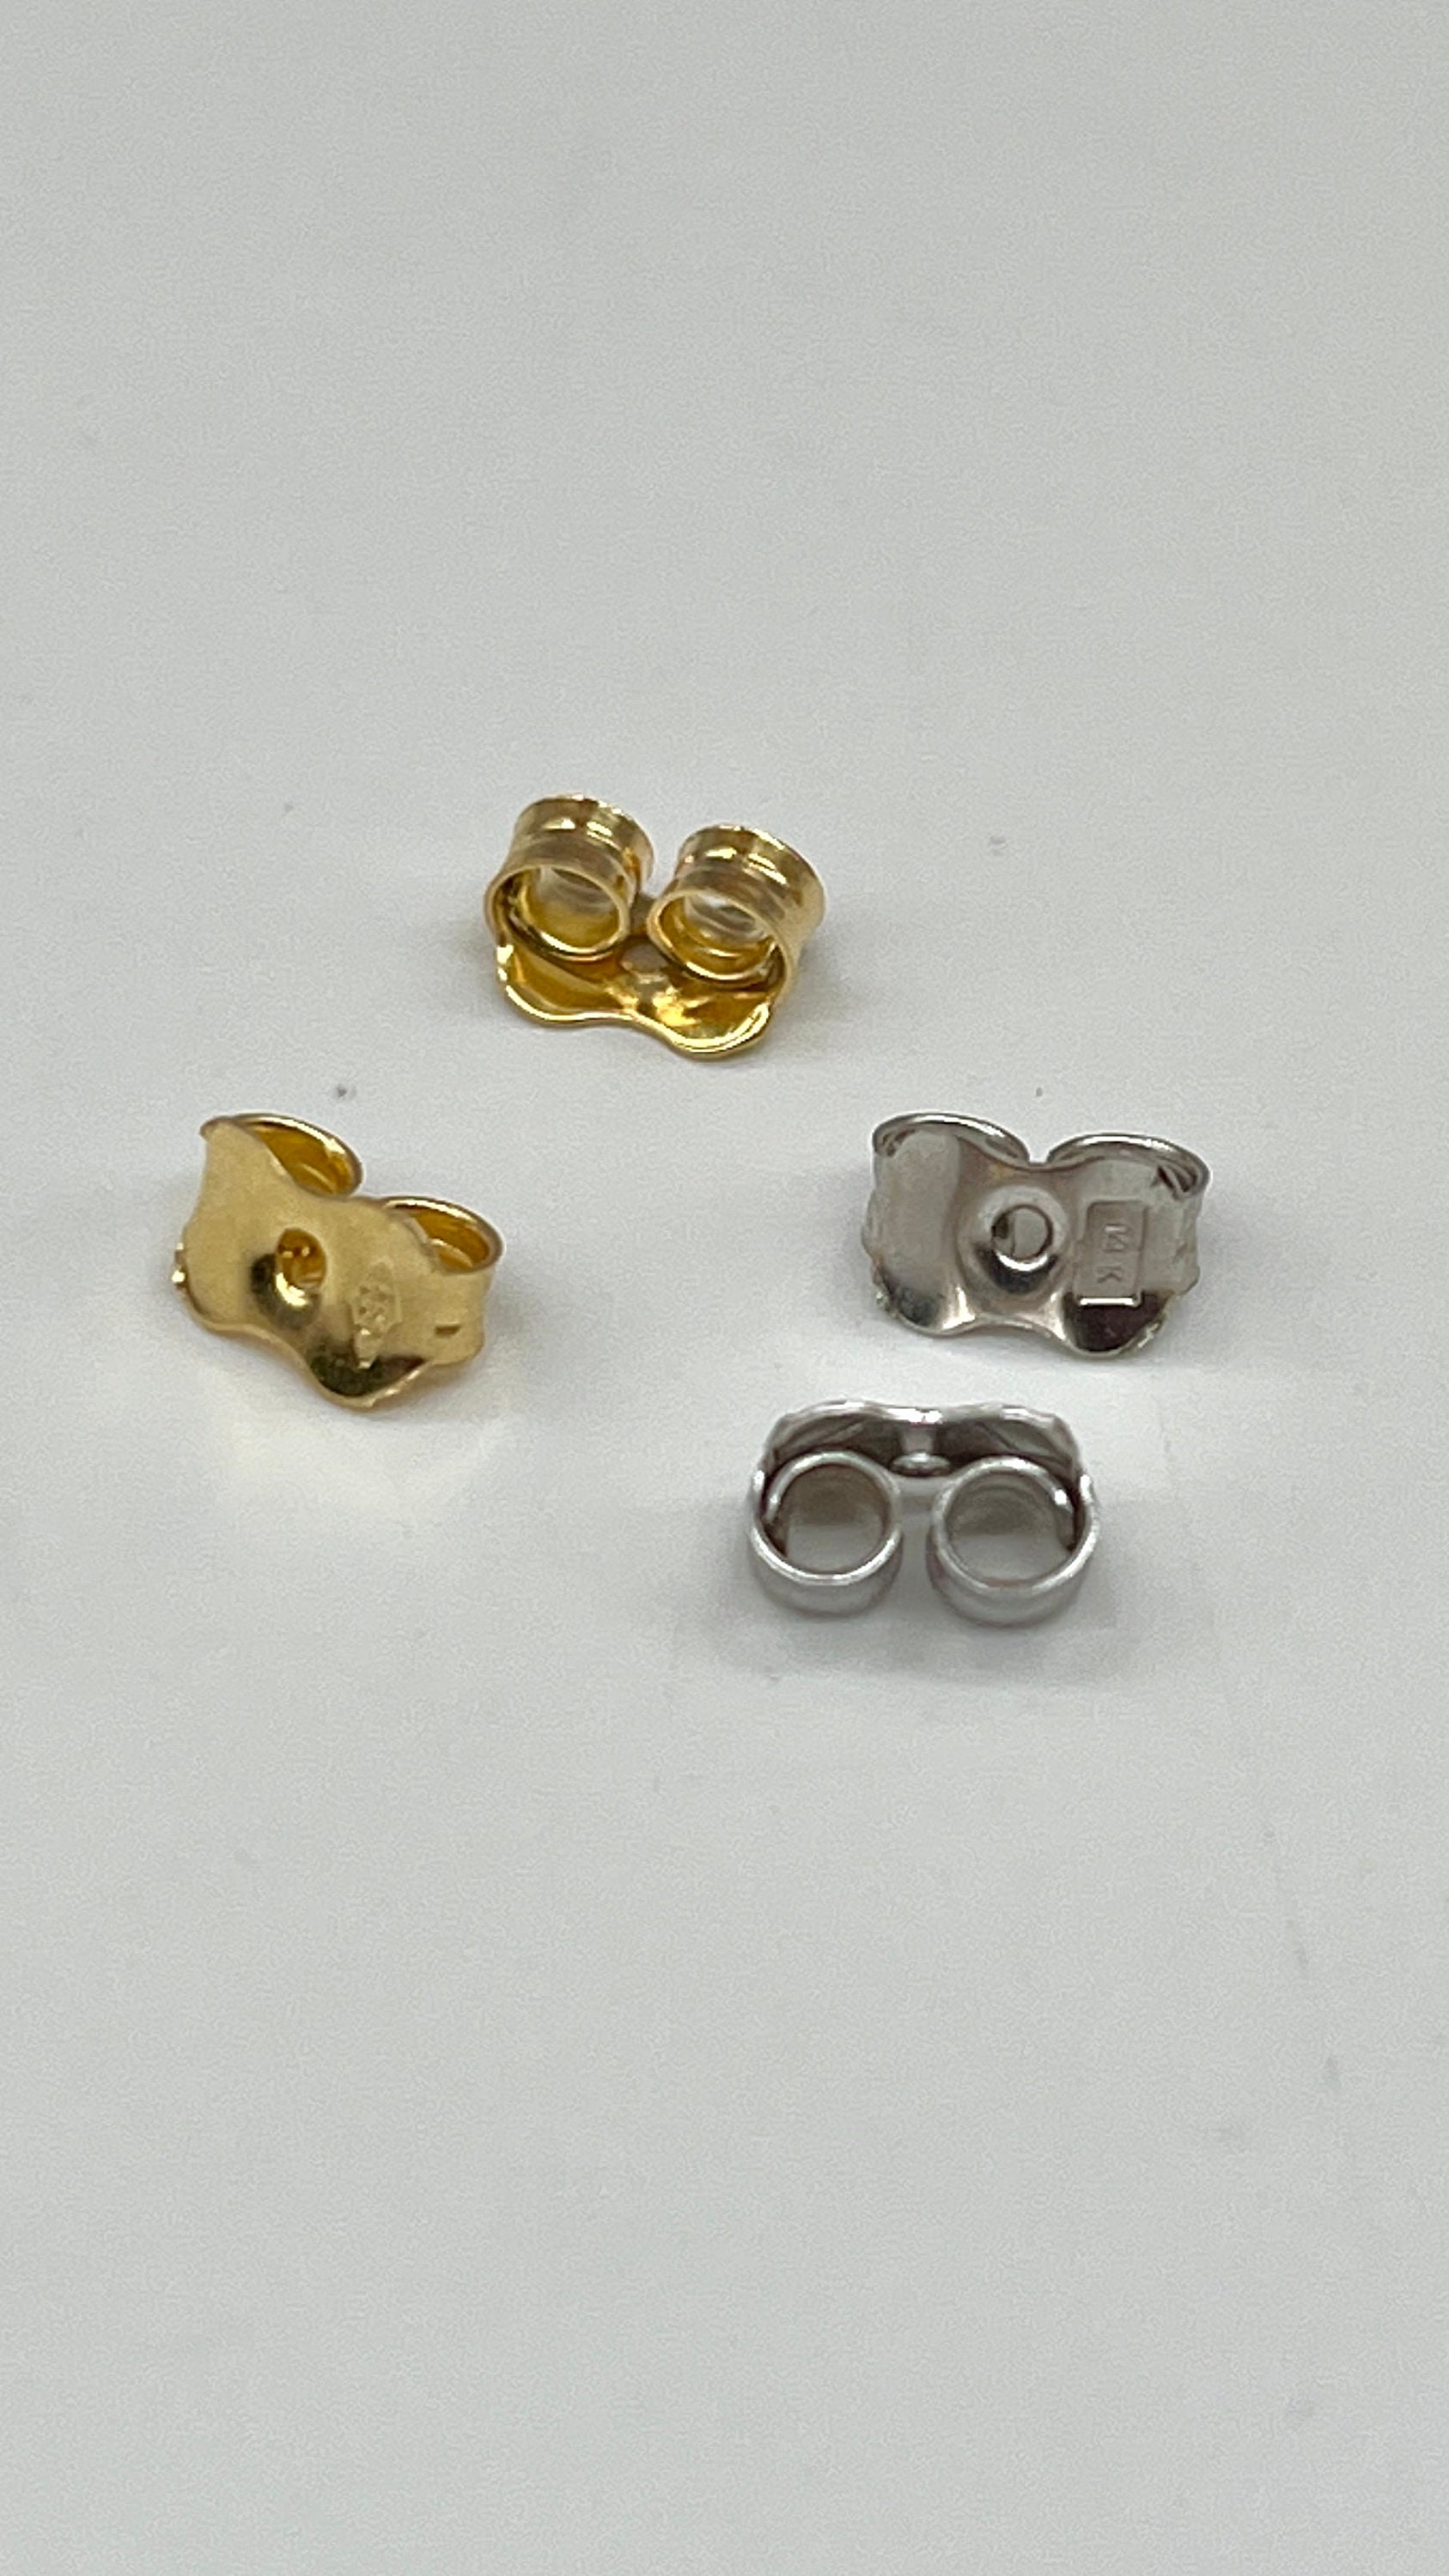 18k gold earring backs for studs, butterfly Earring Backings replacements,1pair